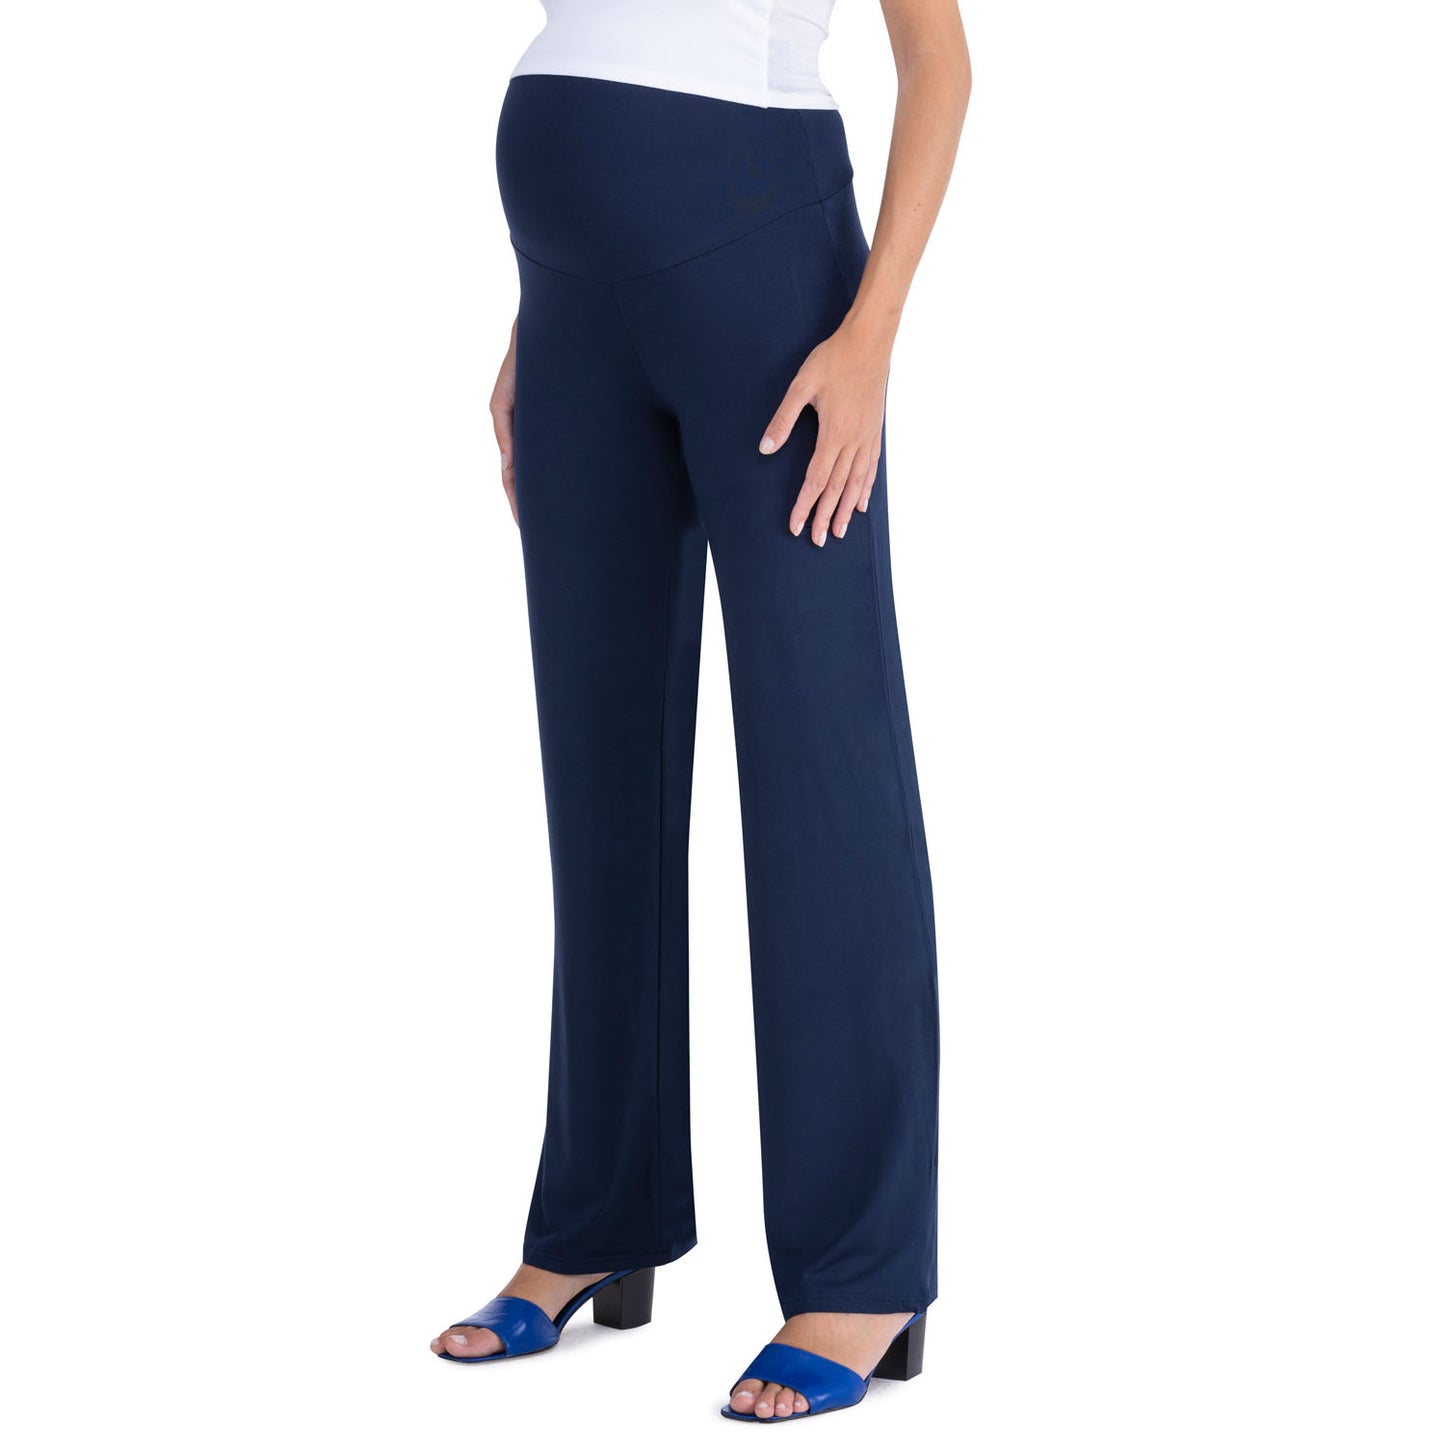 Cinzia - Dressy maternity pants with wide legs